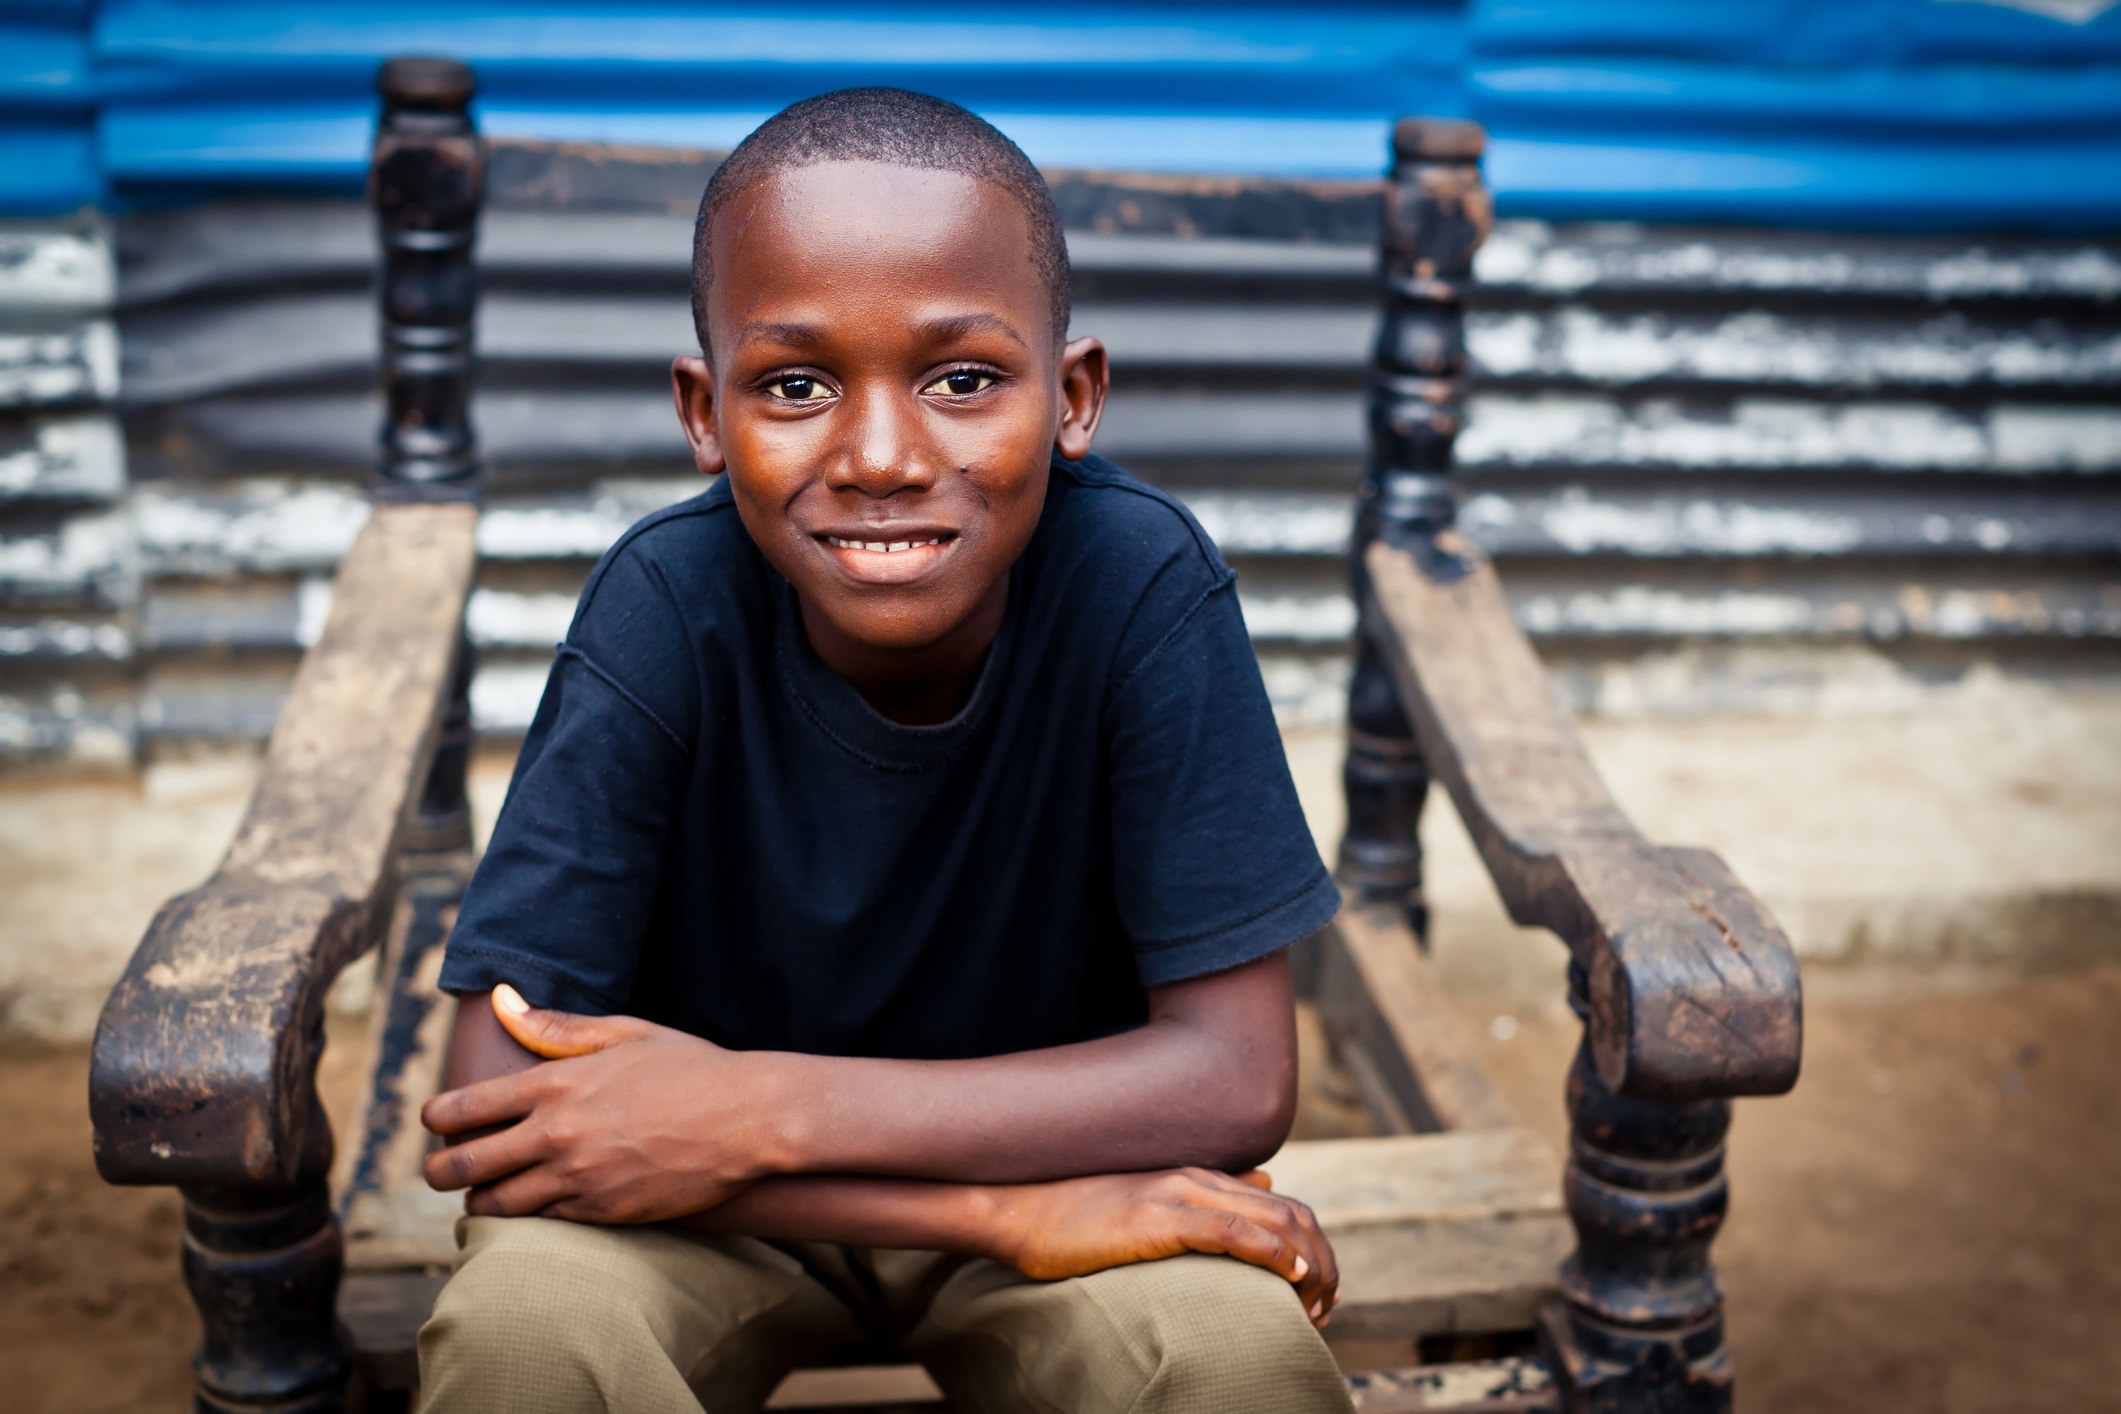 An African boy sitting in a broken chair with his hands on his knees while smiling at the camera.